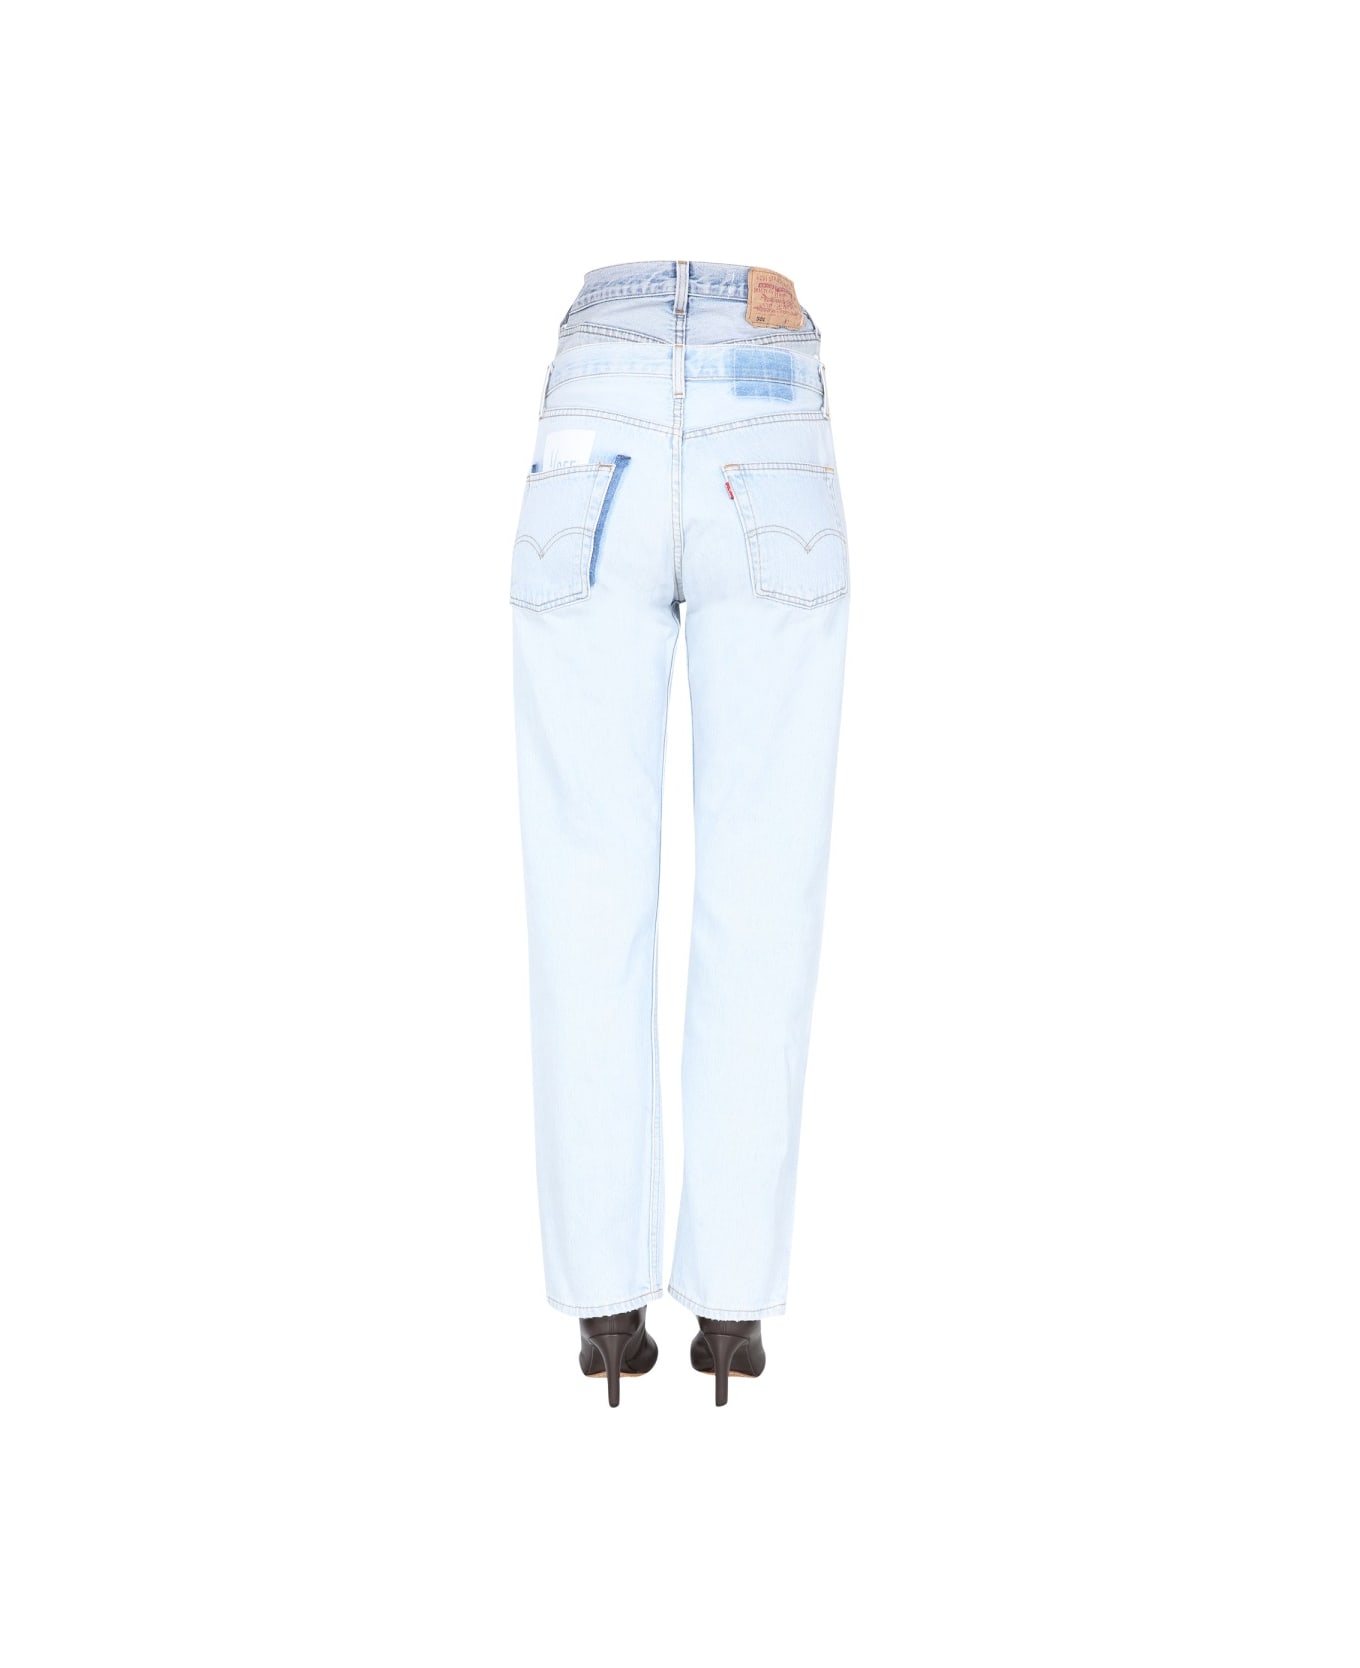 1/OFF Double Waisted Jeans - DENIM name:463